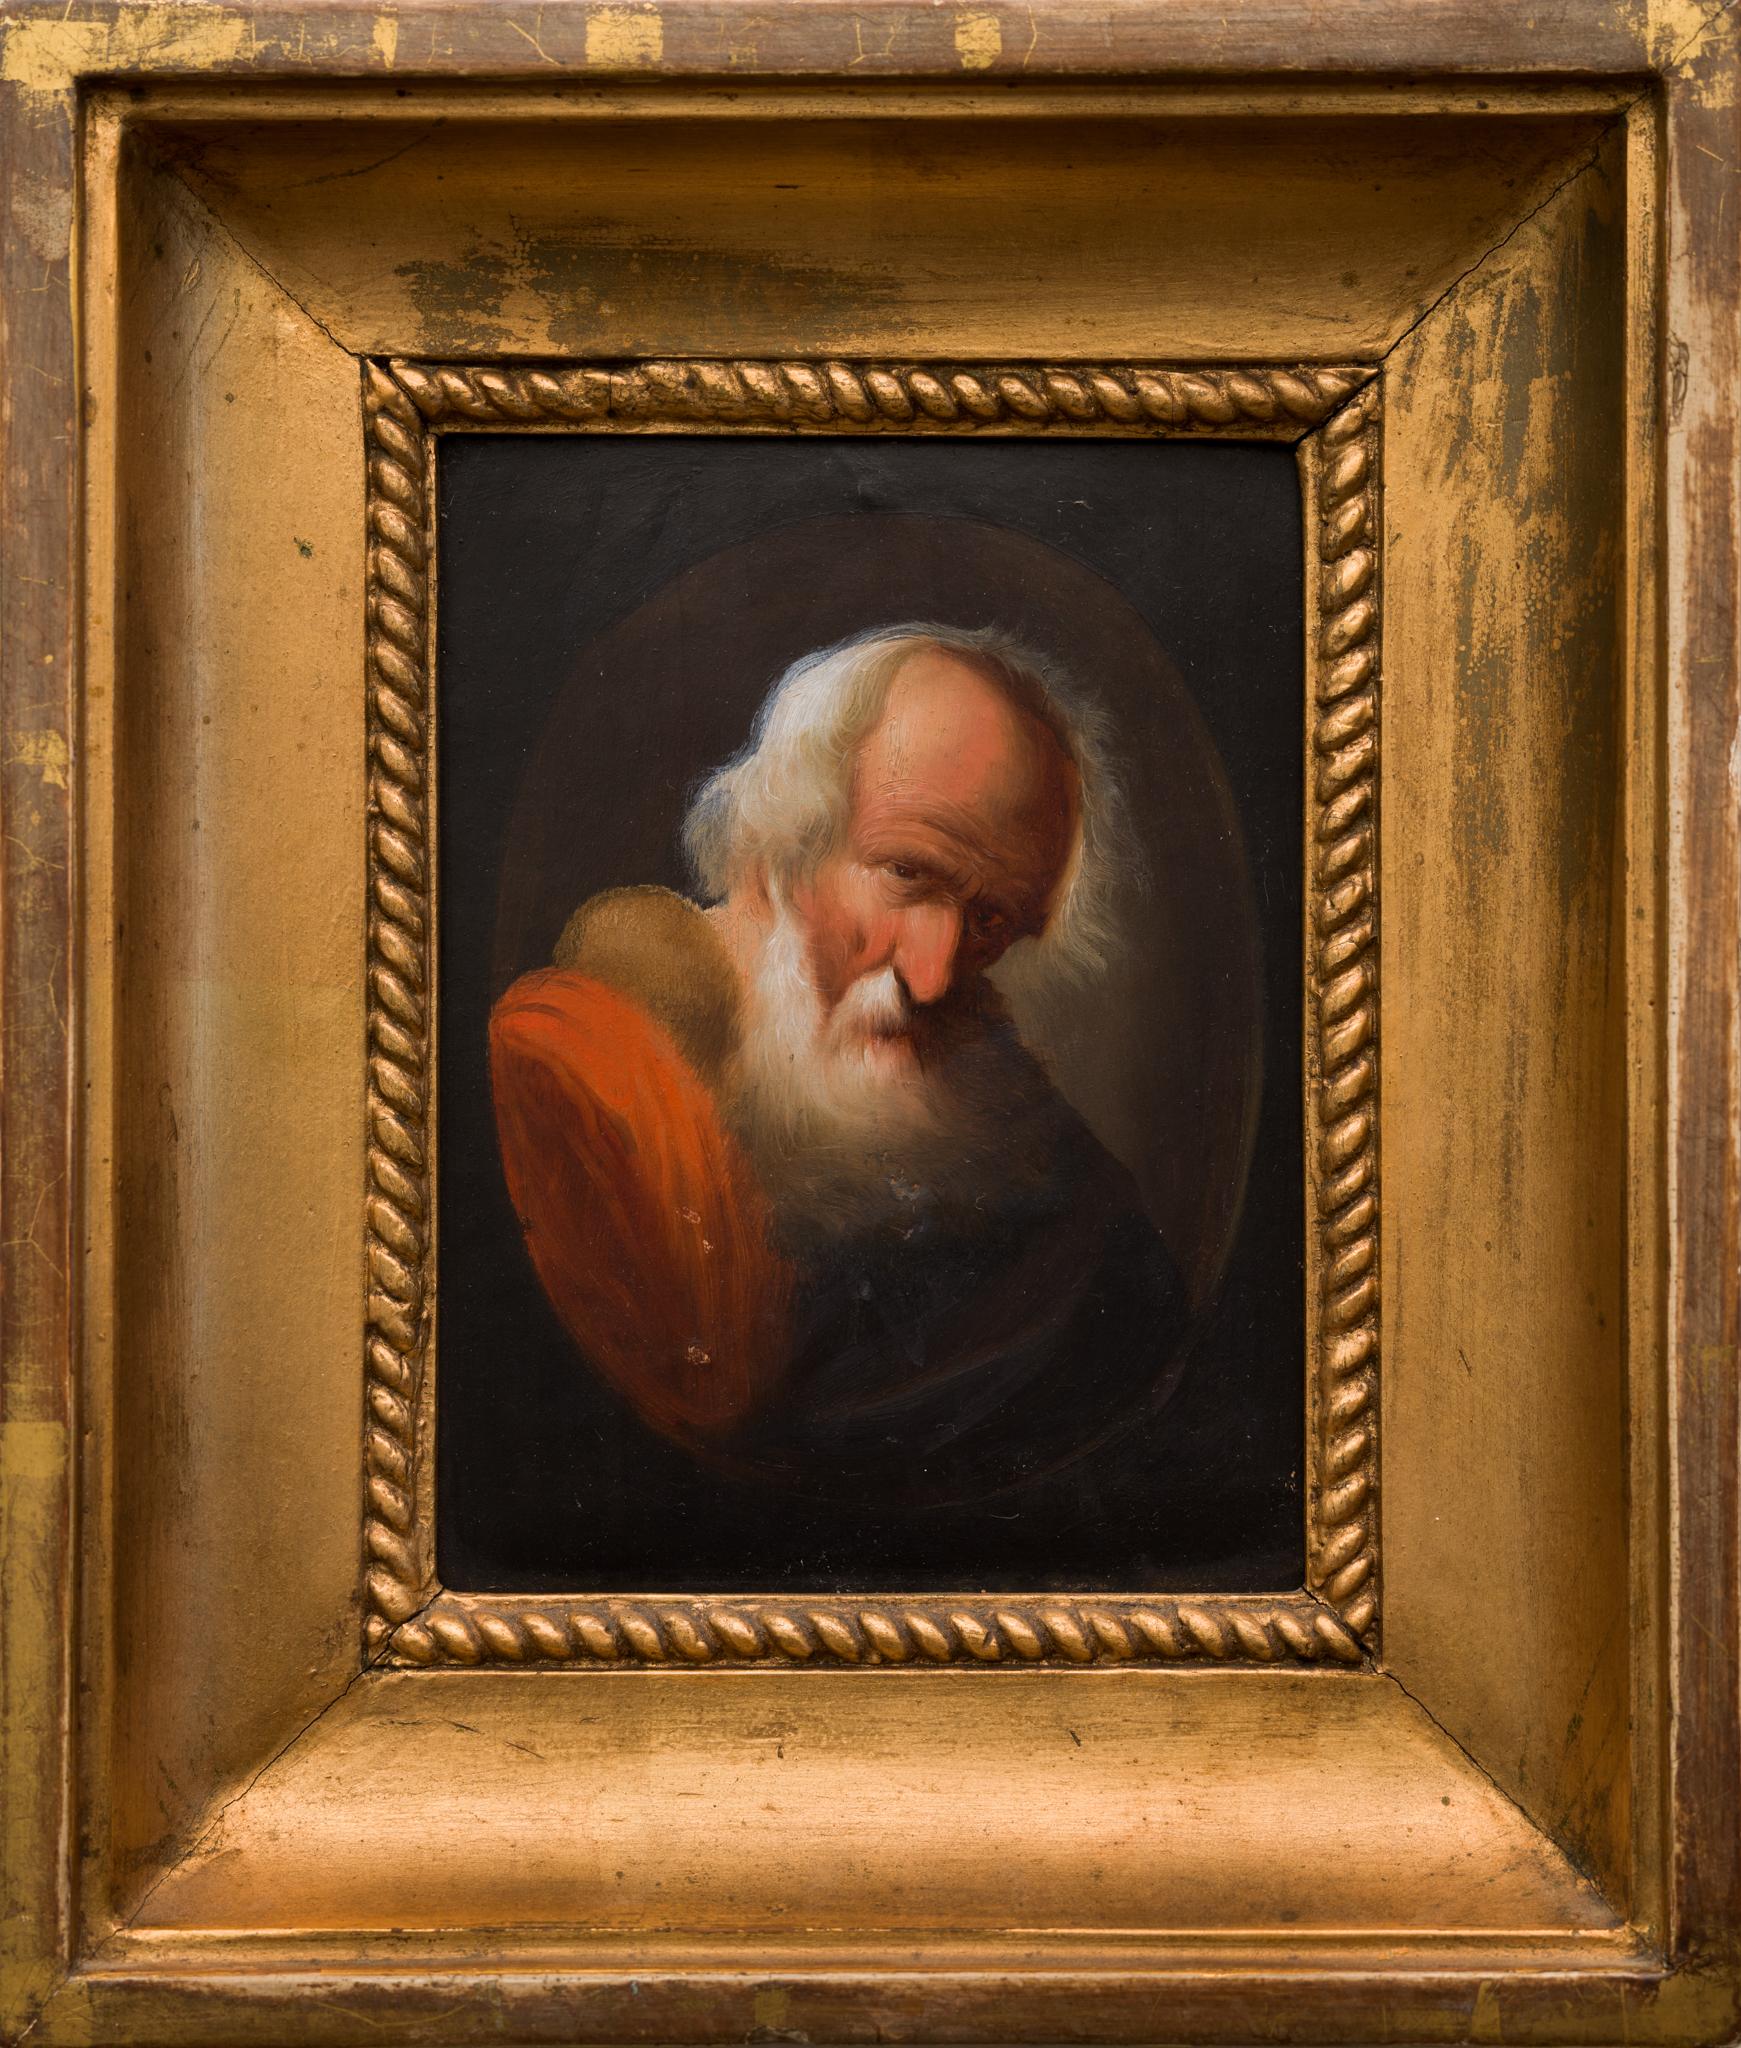 Portrait of an Old Man. Gold Frame Included For Sale at 1stDibs